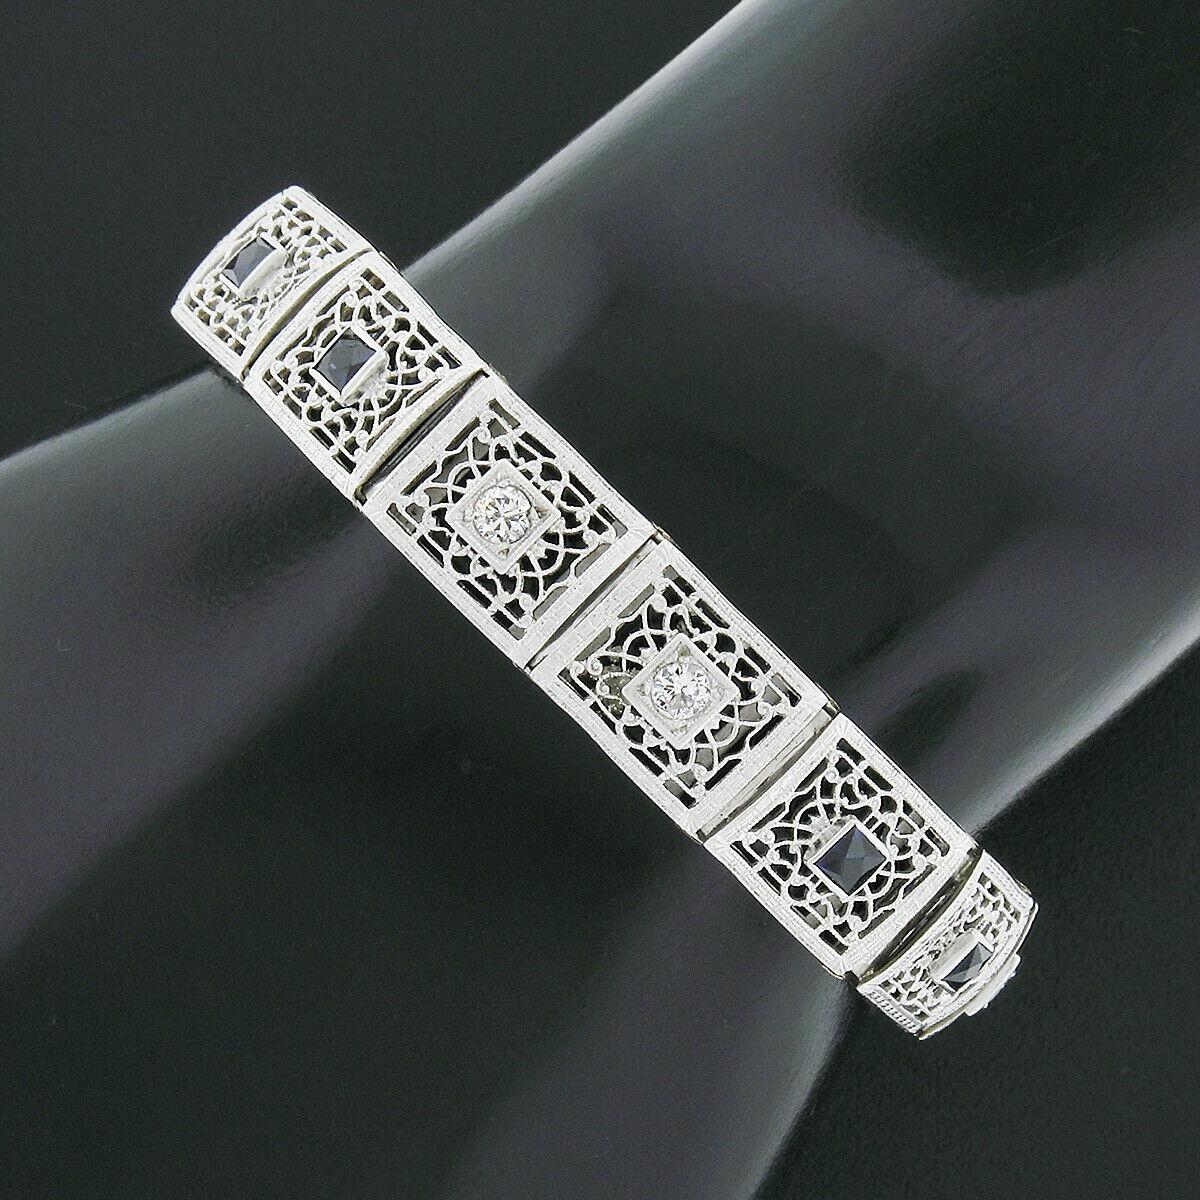 Here we have an absolutely incredible antique bracelet that was crafted in solid 14k white gold during the are deco period. It features wide rectangular links that are fully and elegantly decorated with truly outstanding open filigree and engraved